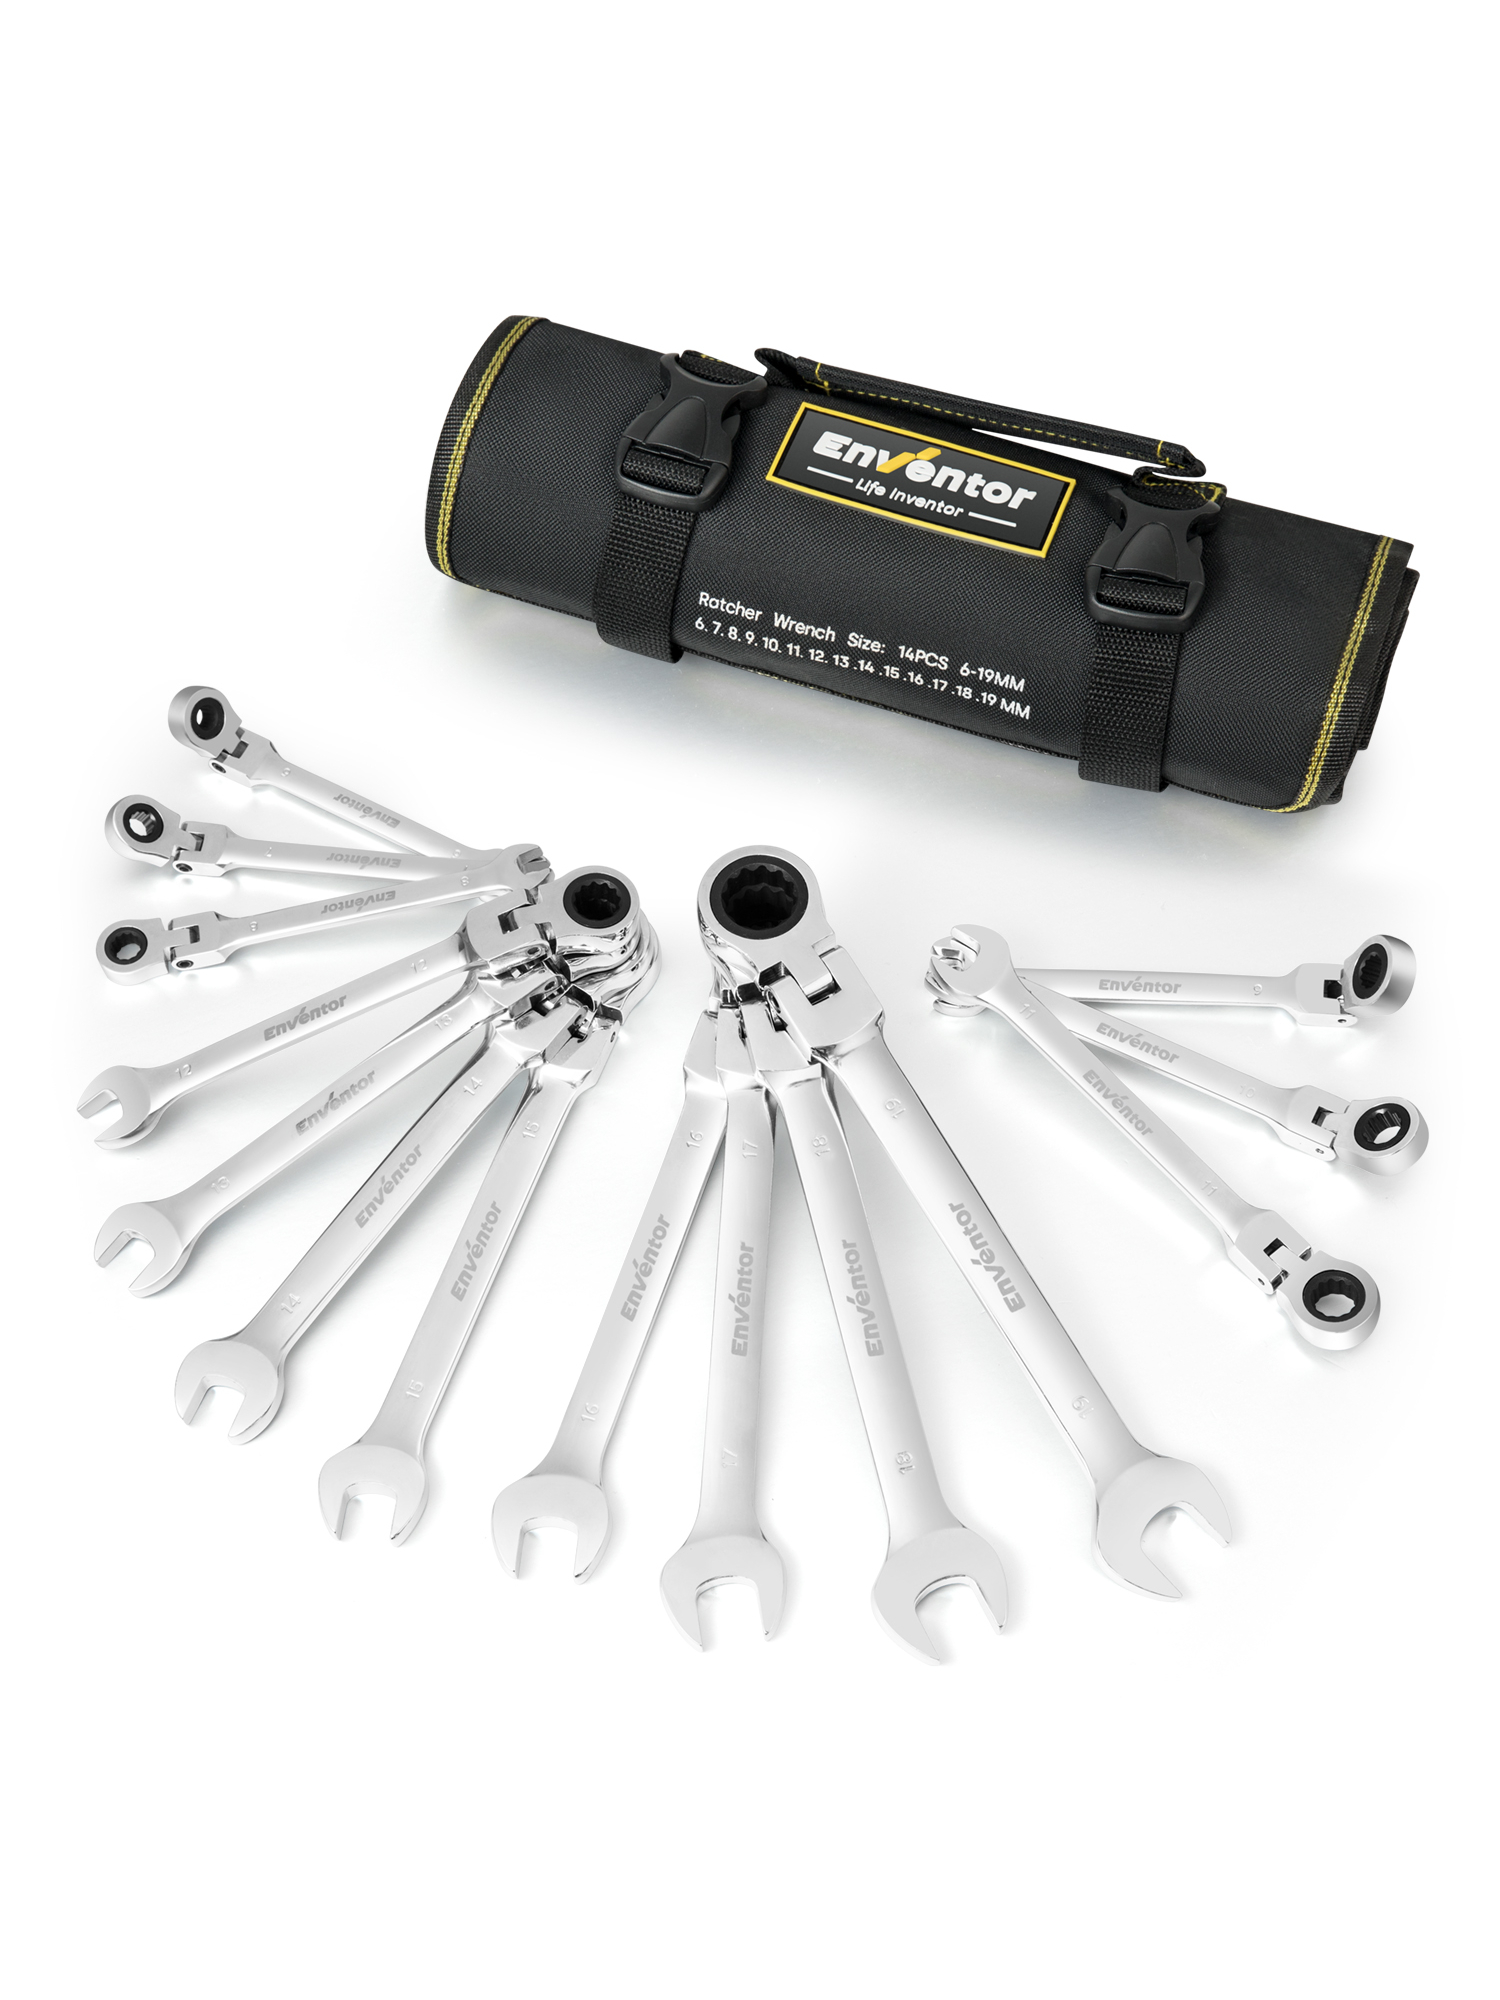 Enventor Flex-Head Ratcheting Combination Metric Wrench Set - 14 Pieces, CR-V Steel, 72-Teeth, with Carrying Bag Organizer